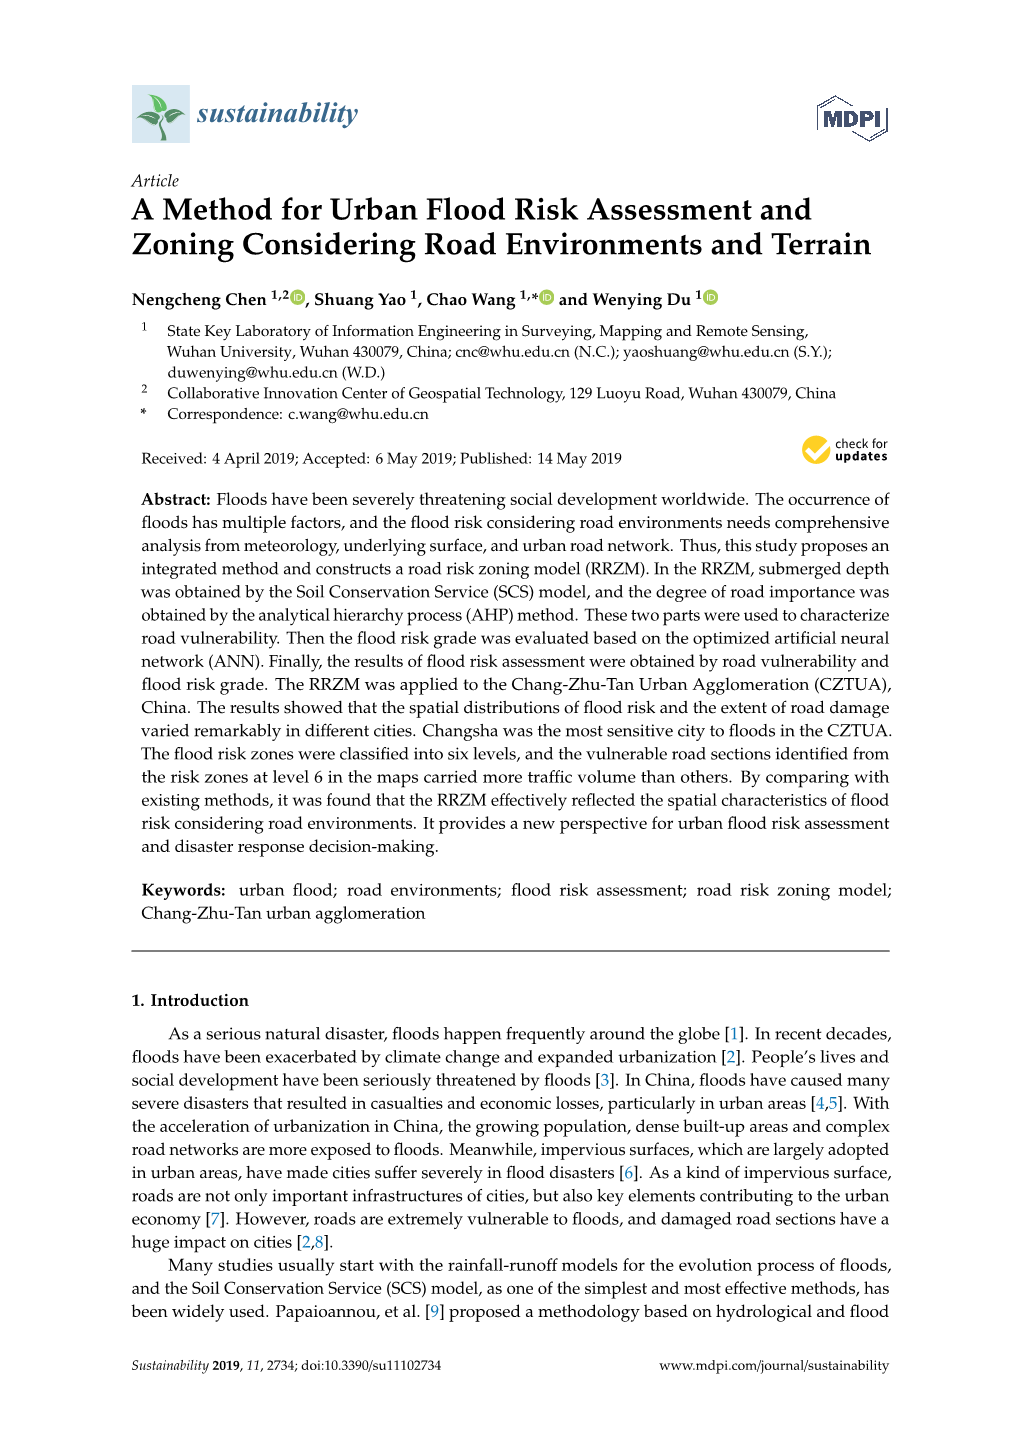 A Method for Urban Flood Risk Assessment and Zoning Considering Road Environments and Terrain